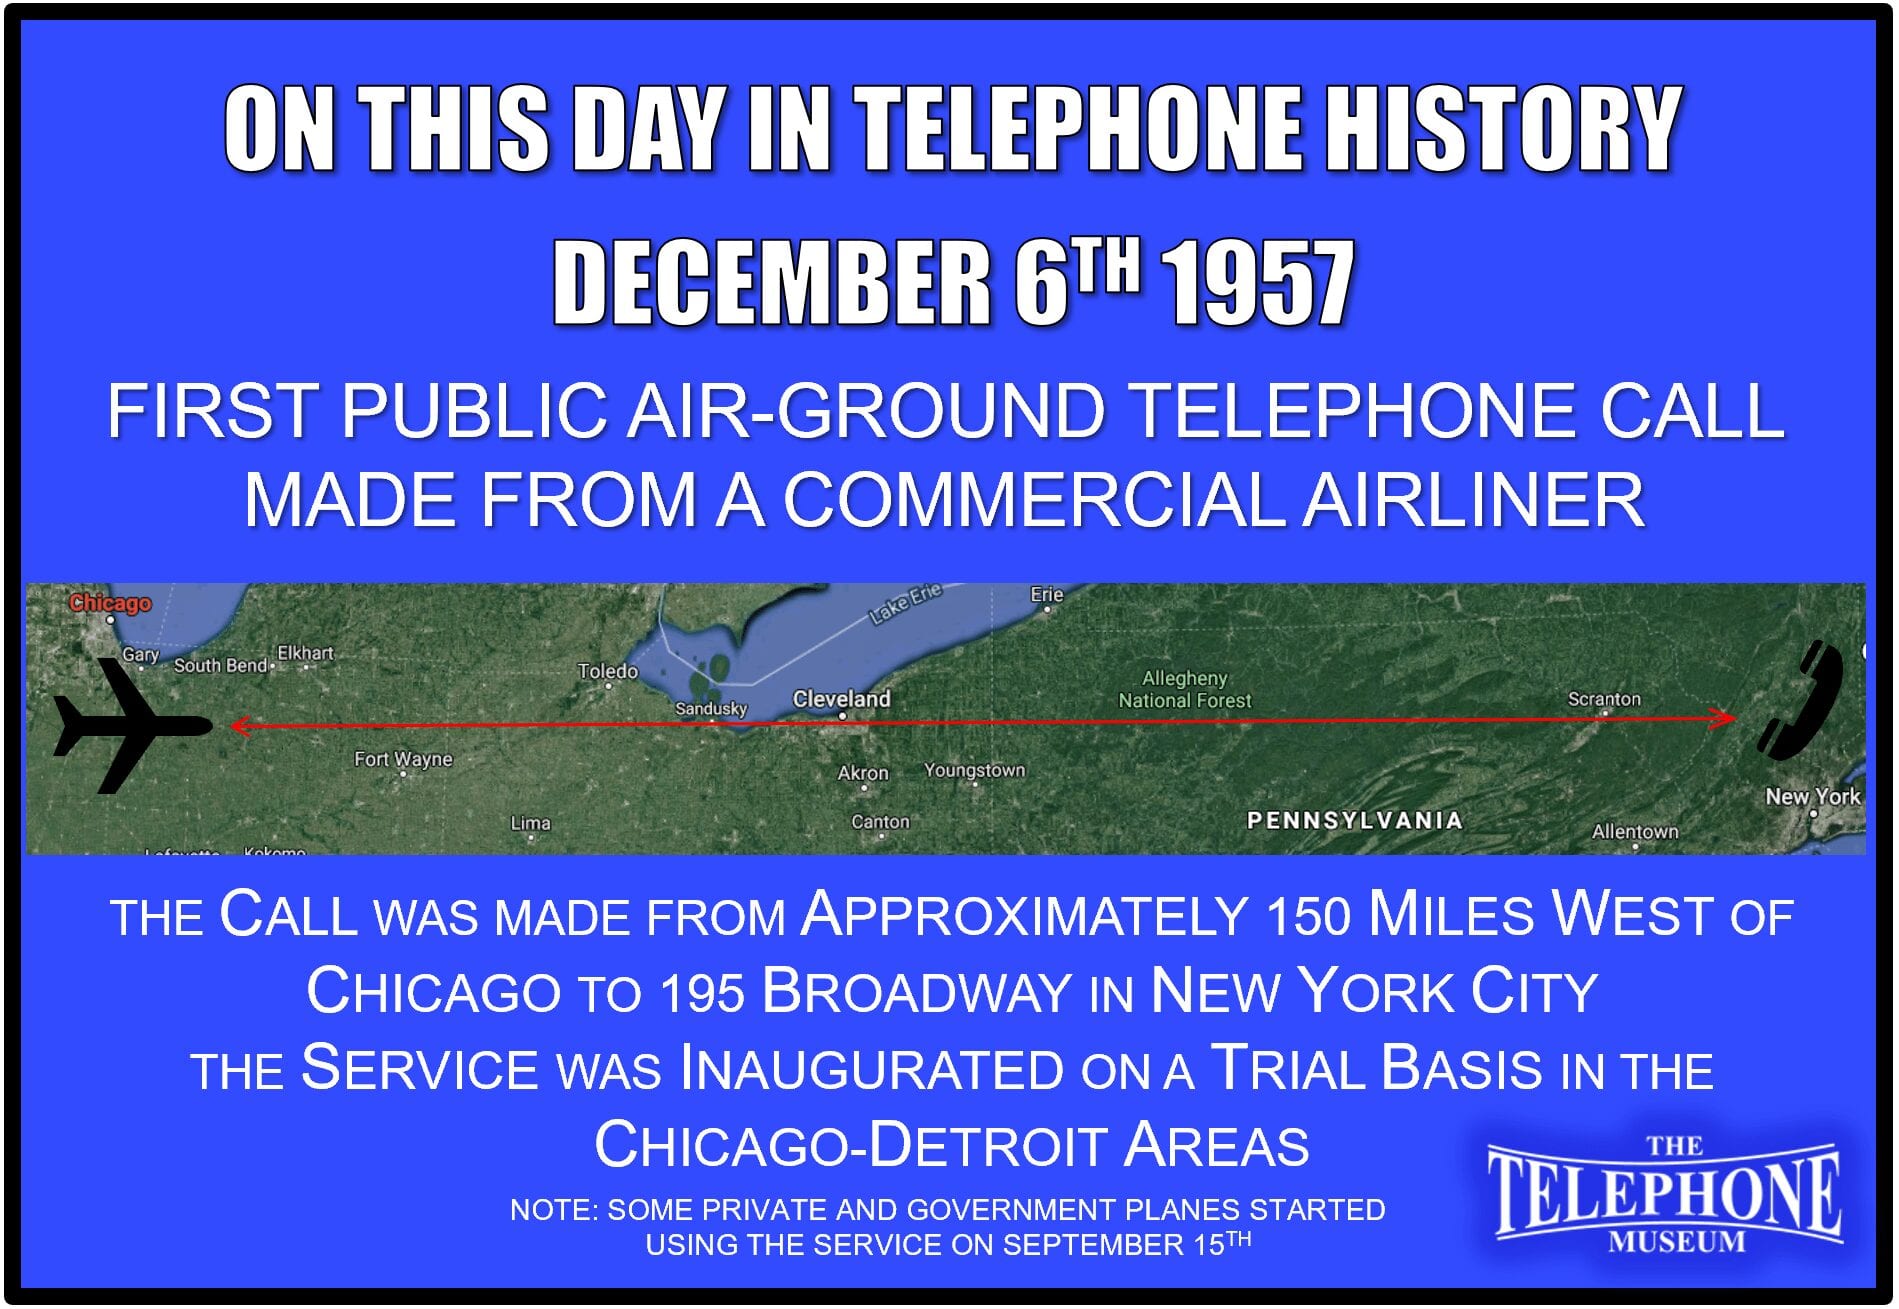 On This Day in Telephone History December 6TH 1957 - The first public air-ground telephone call made was from a commercial airliner. The call was from about 150 miles west of Chicago to 195 Broadway, New York City. The service was inaugurated on a trial basis in the Chicago-Detroit areas. Some private and government planes started using the service on September 15TH